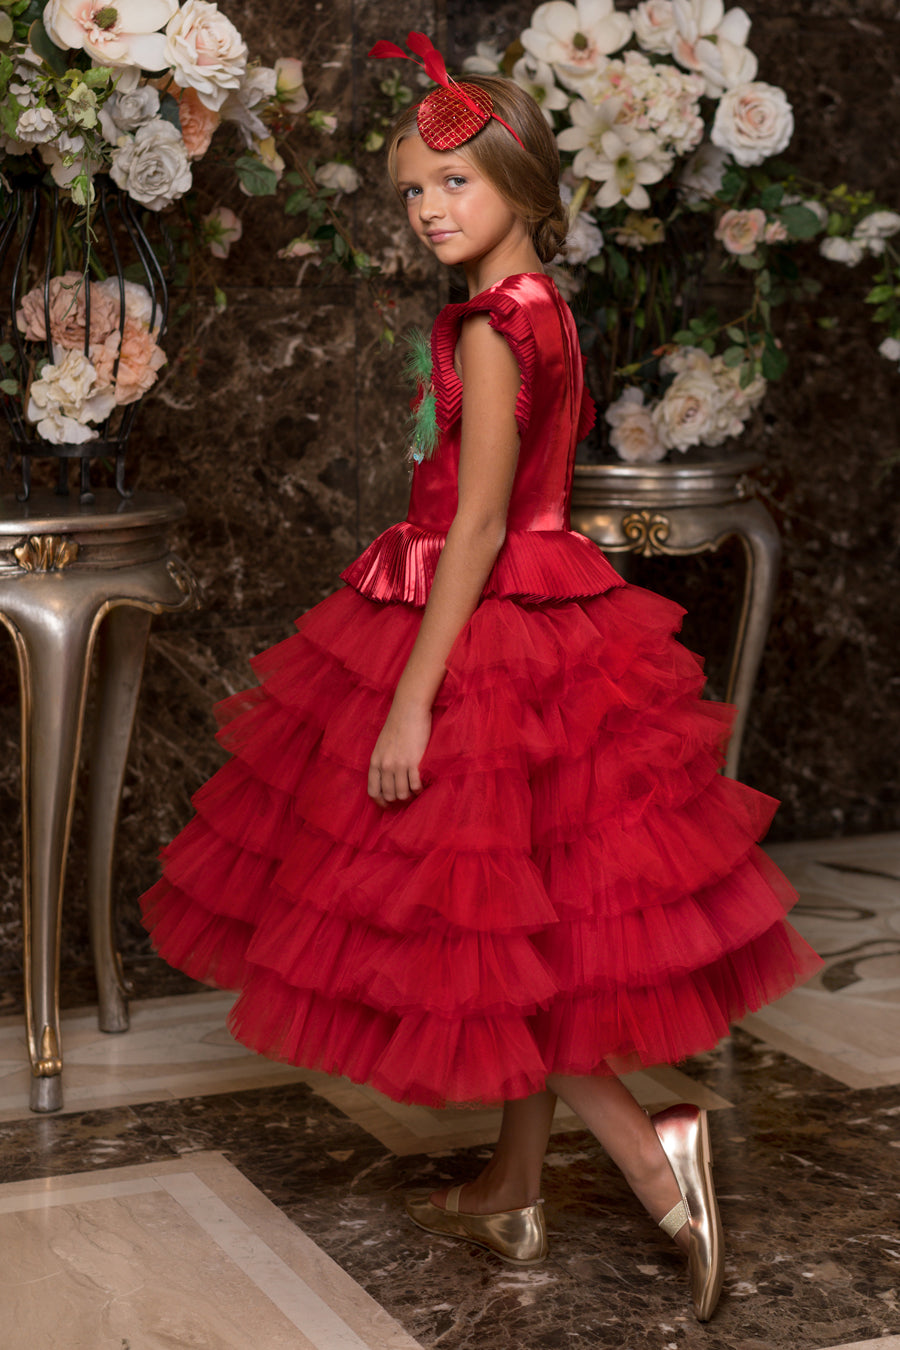 Red tulle dress with handmade embroidery and ruffles